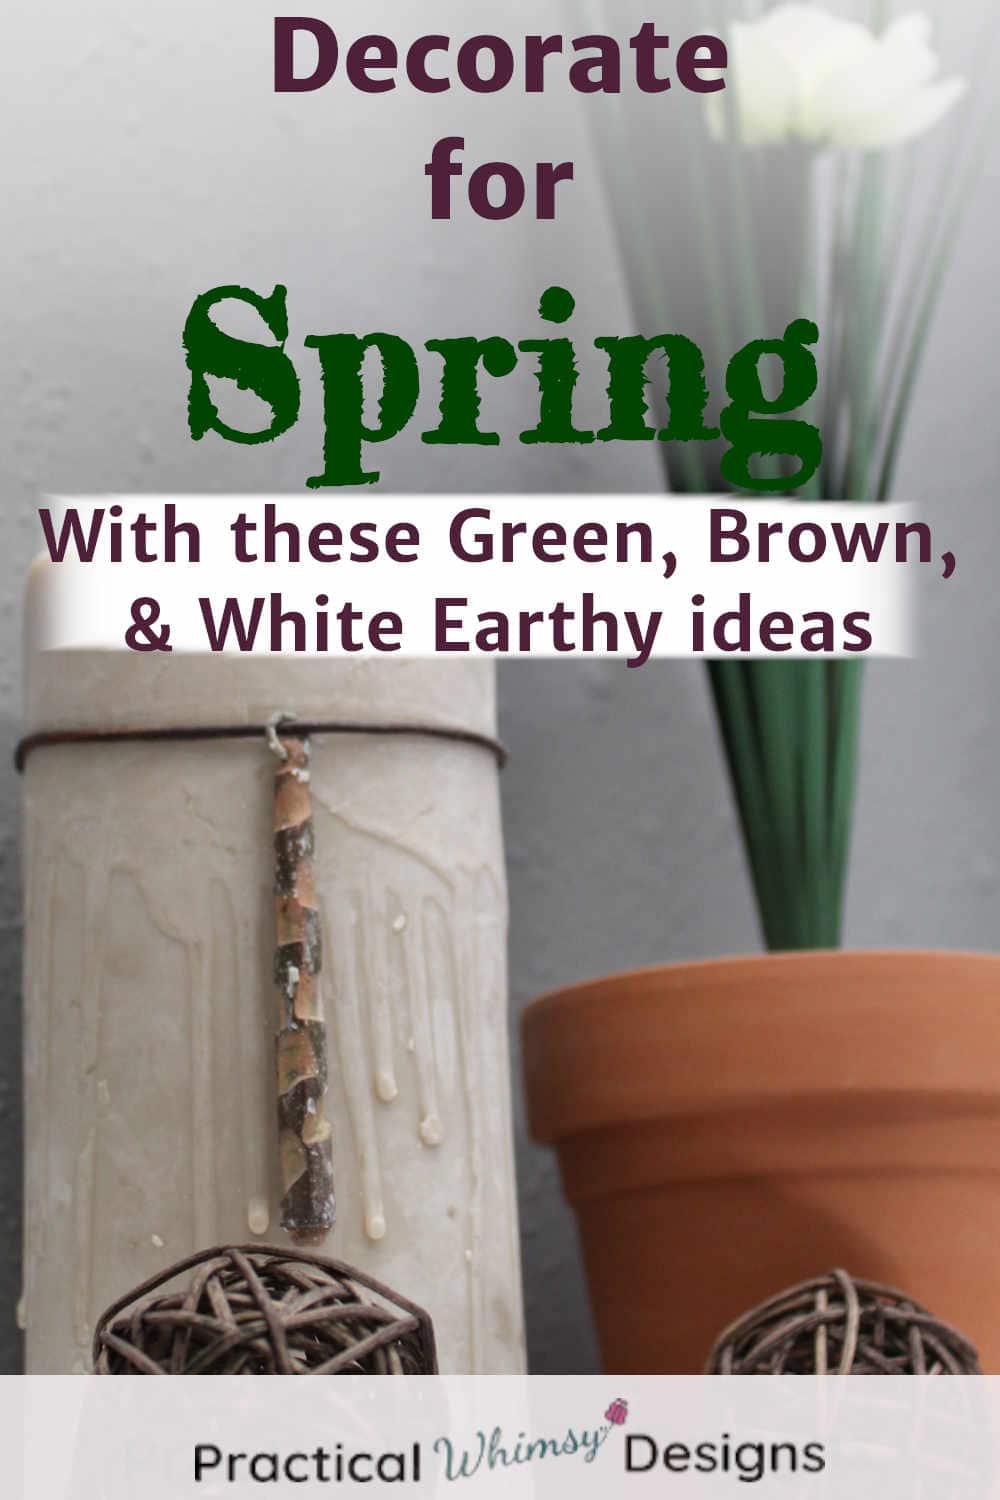 Decorate for spring with these green, brown, and white earthy ideas